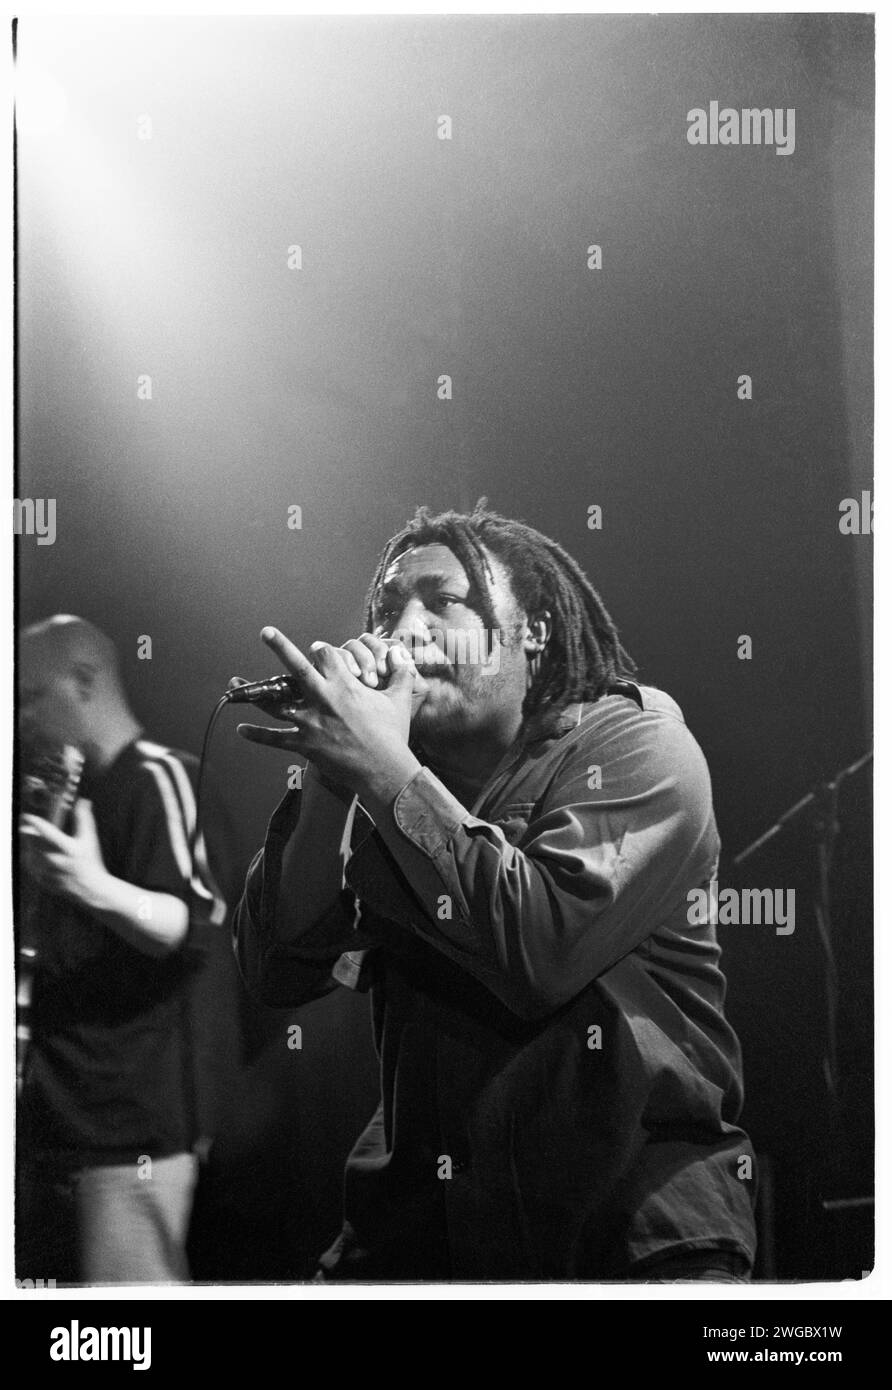 BENJI WEBBE, DUB WAR, 1995: Benji Webbe of the Welsh metal reggae band Dub War playing a very early gig  at Cardiff University Terminal in Cardiff, Wales on 10 March 1995. Photo: Rob Watkins. INFO: Dub War, a British alternative metal band formed in 1993, blended reggae, punk, and metal. Albums like 'Pain' showcased their energetic and politically charged sound. Though short-lived, Dub War's fusion of genres left a mark on the '90s alternative and metal scenes. Stock Photo